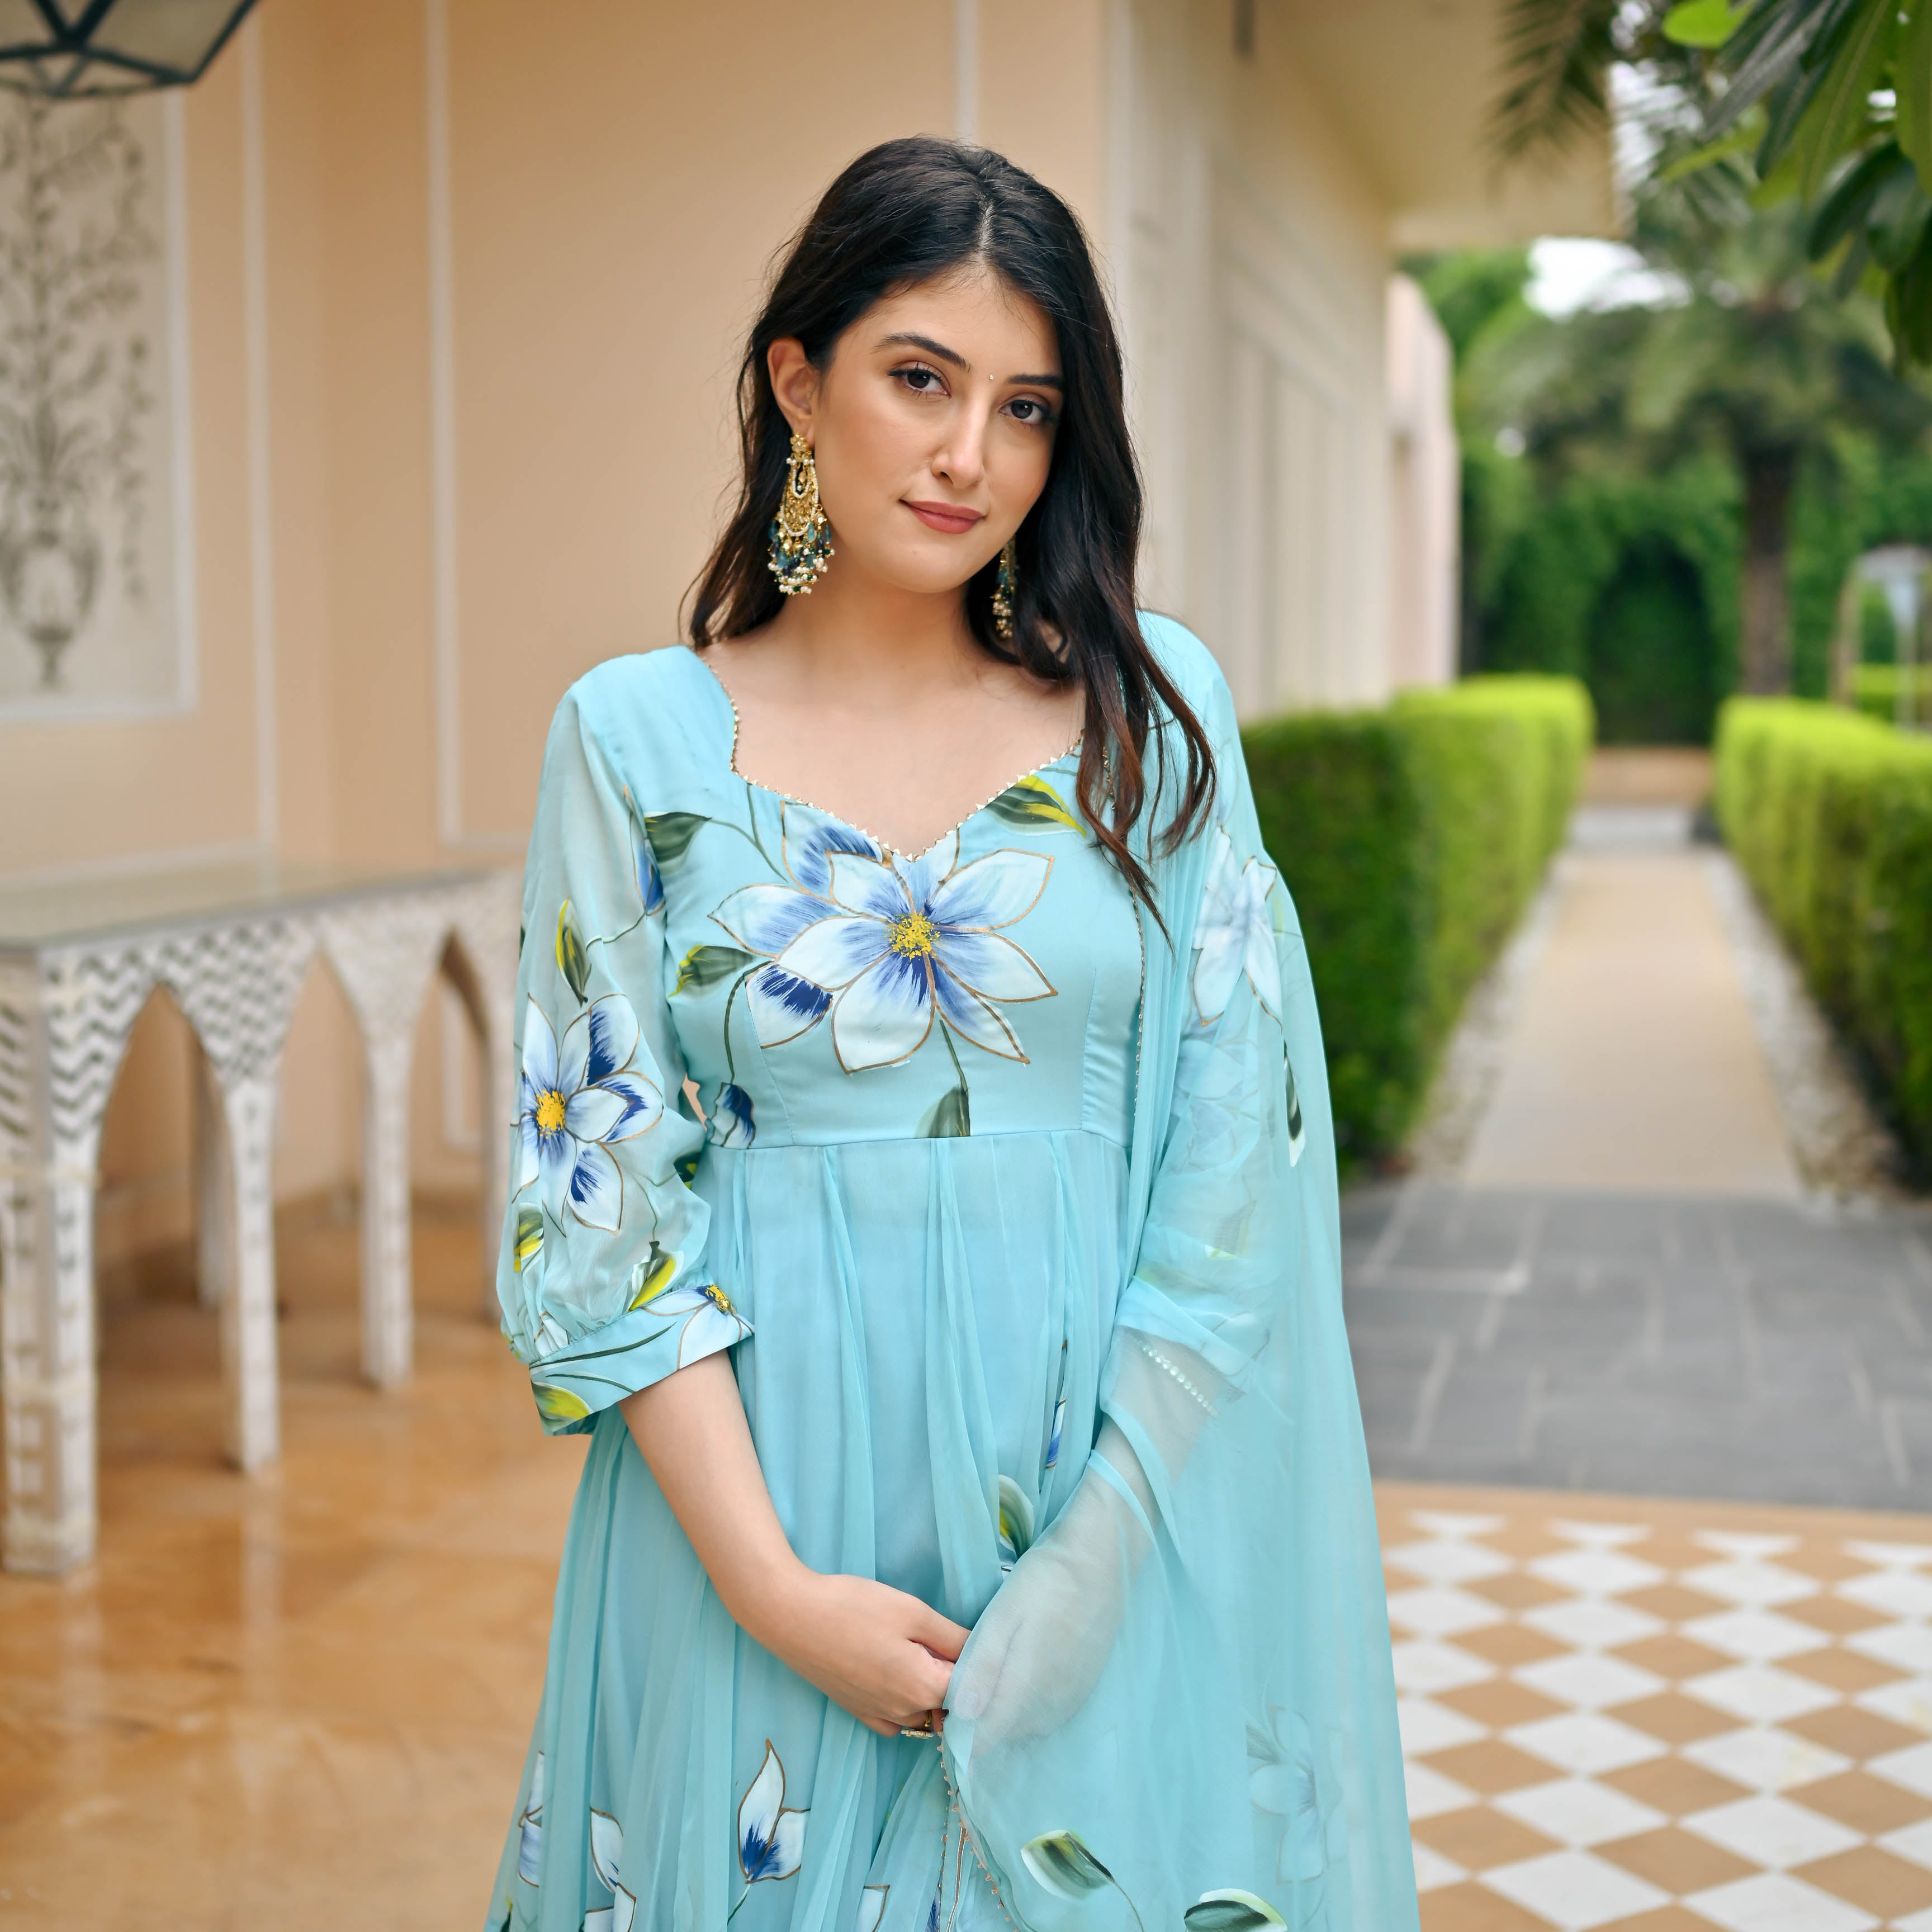 Seashell Sky Blue Chiffon Hand Painted Suit Set For Women Online